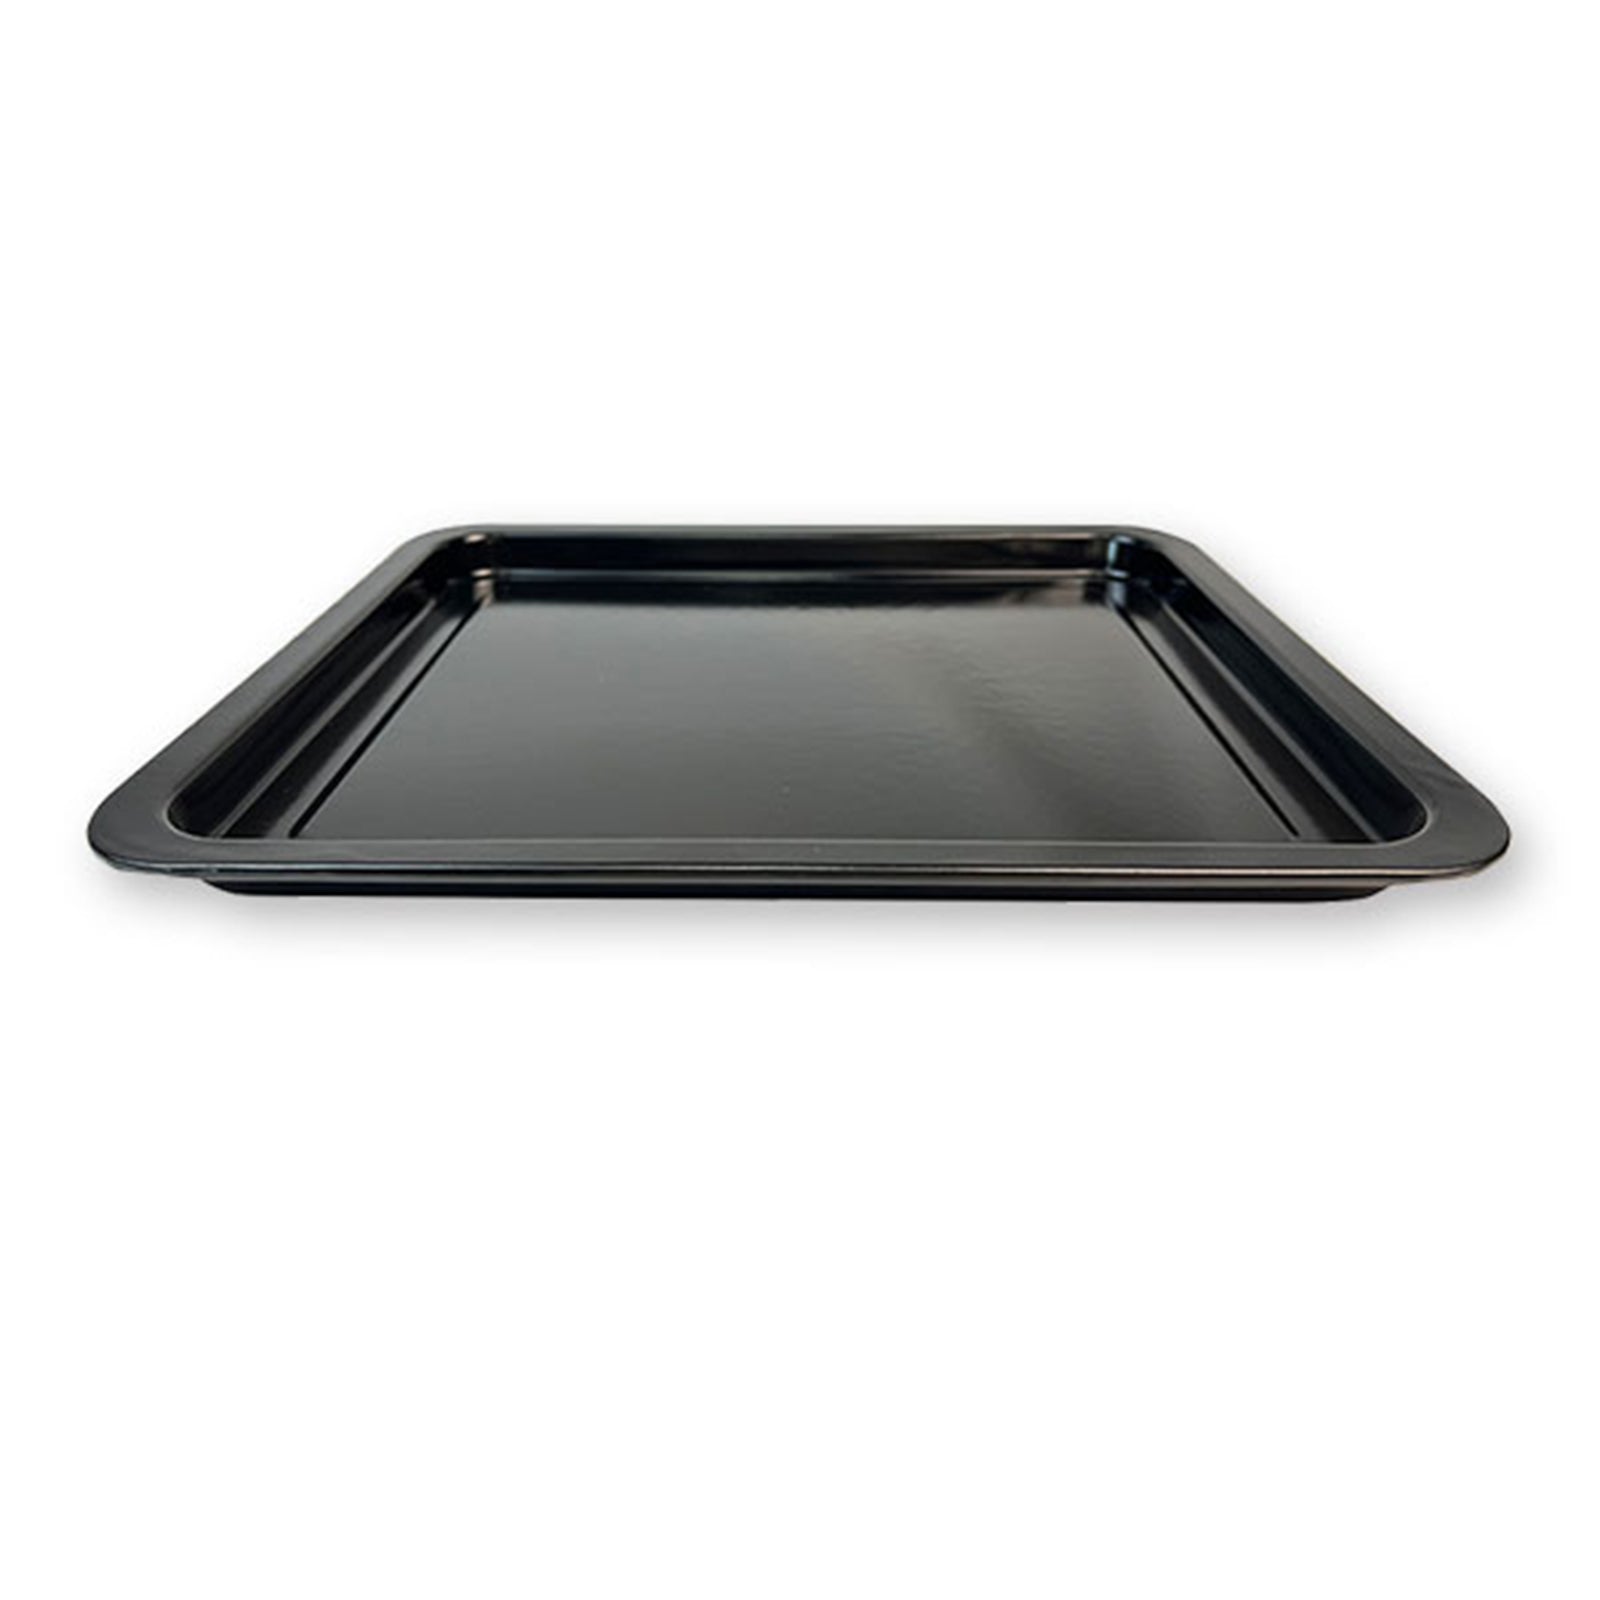 HYSapientia 15L Air Fryer Oven Accessories Baking Tray